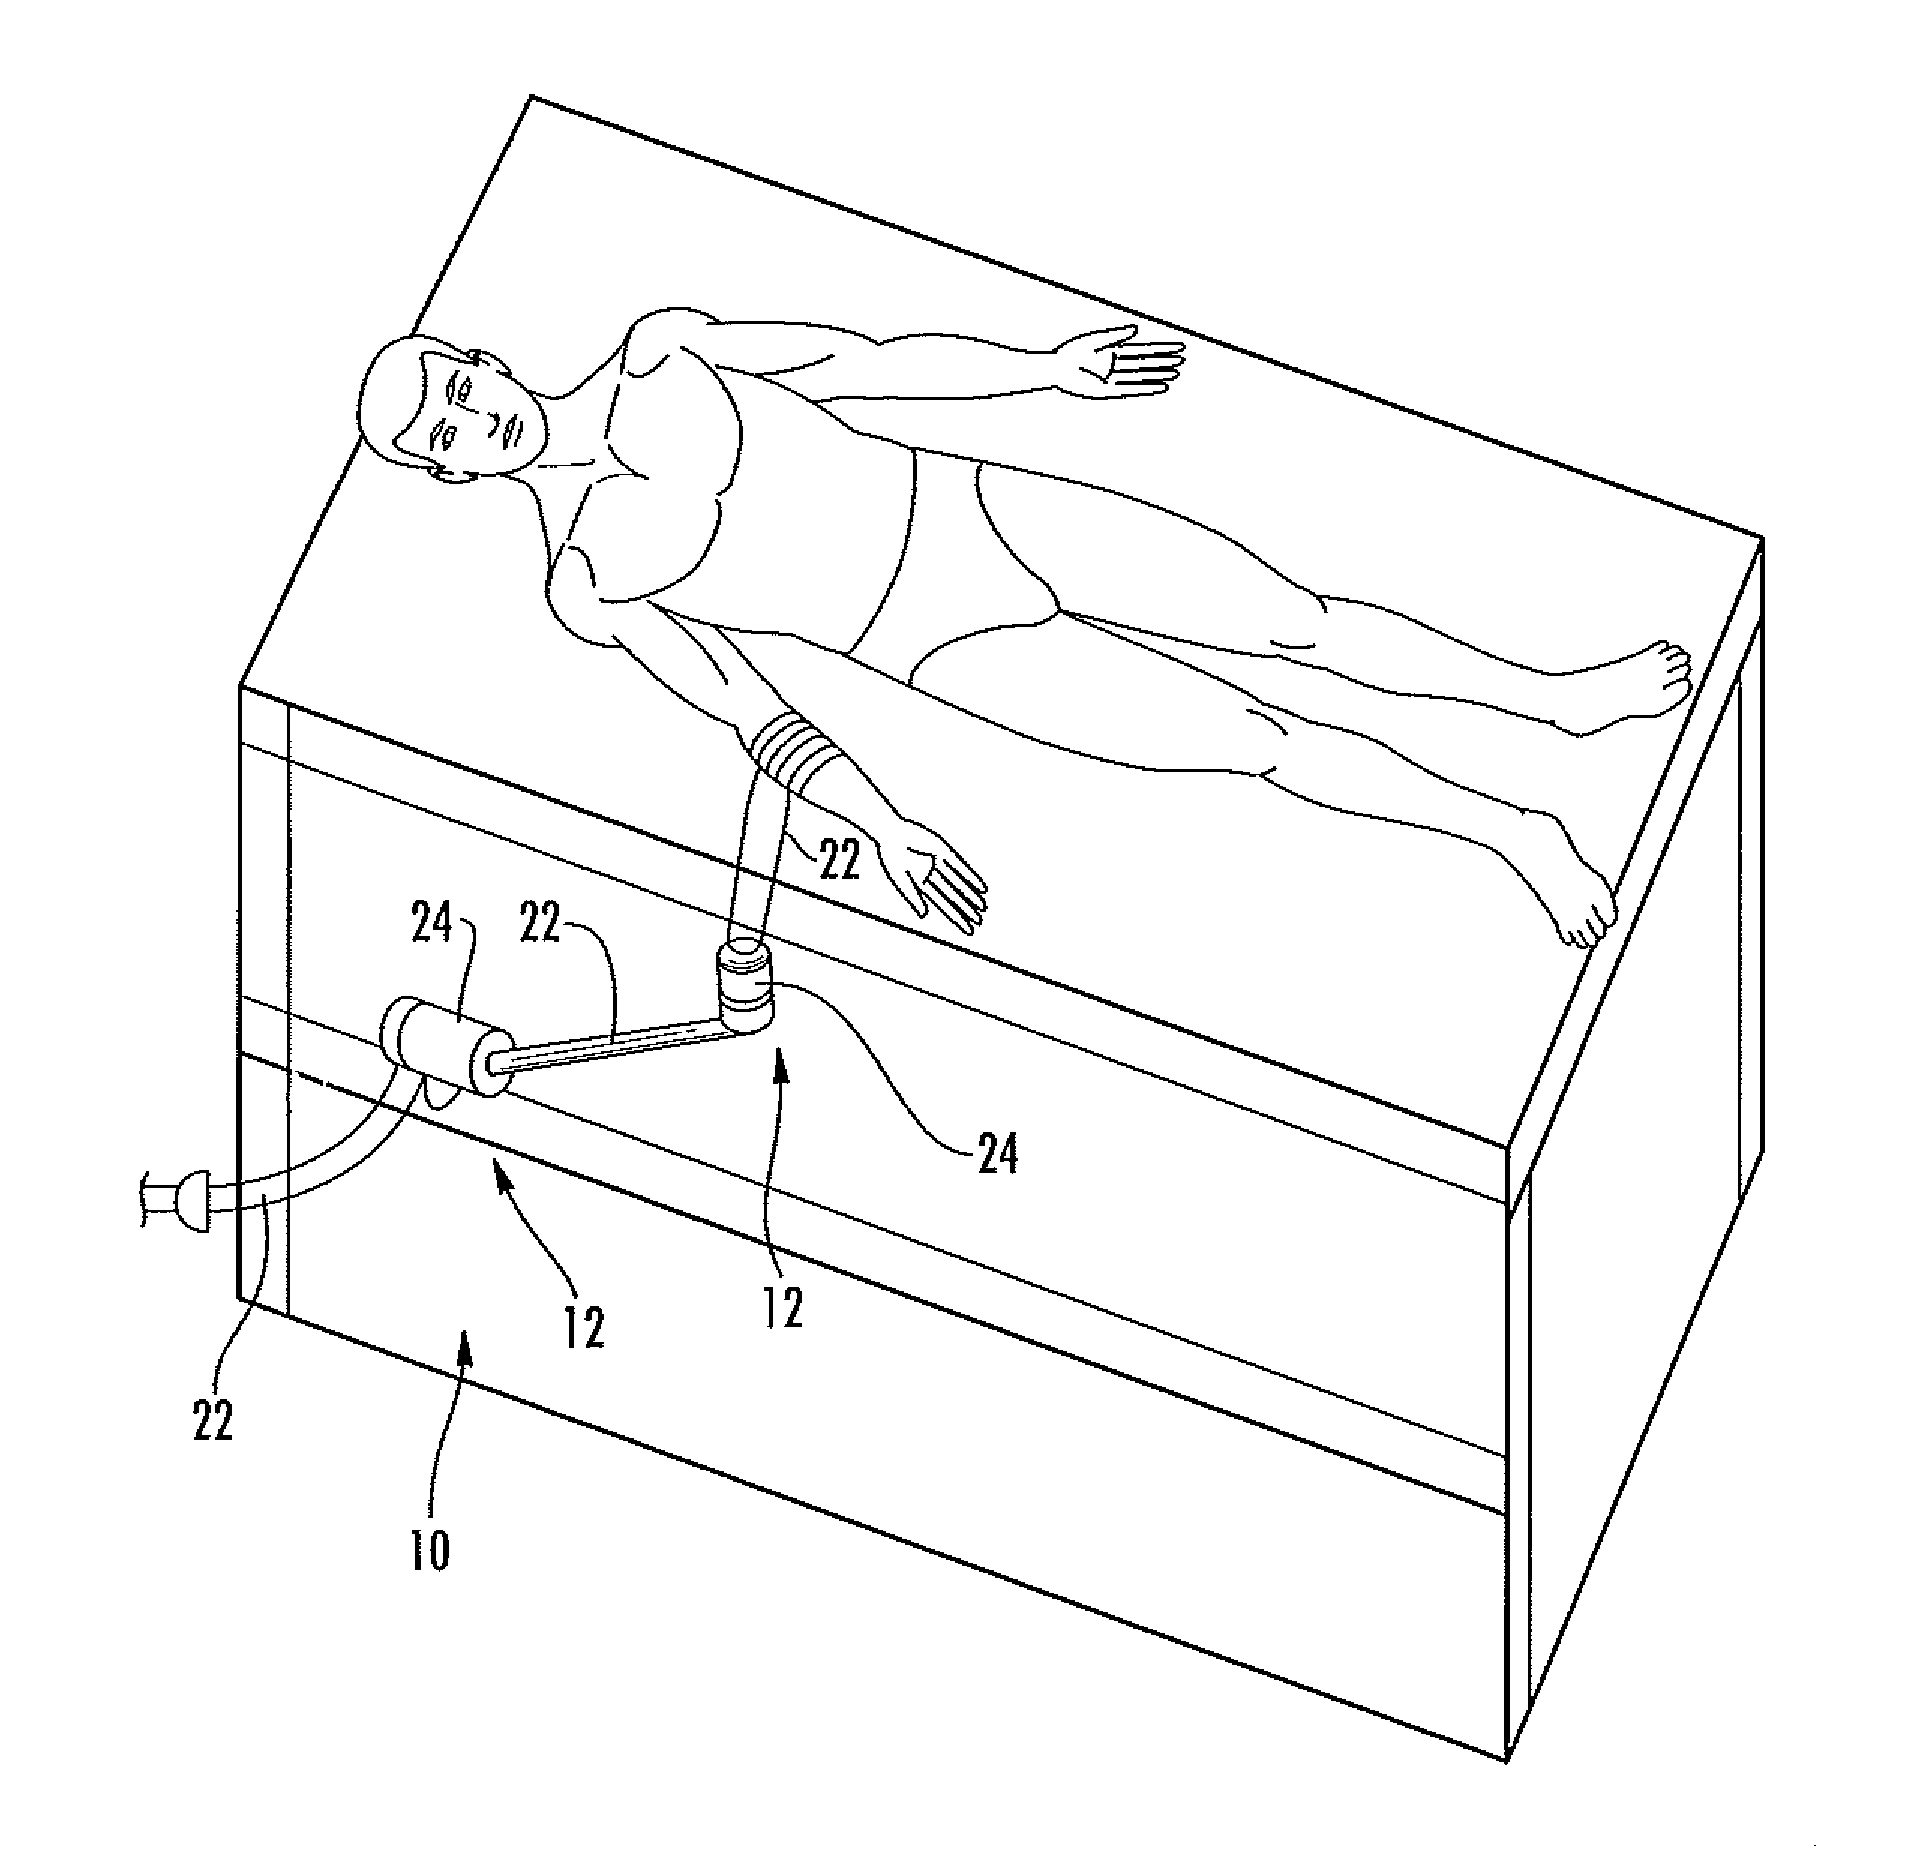 Electromagnetic locking mechanism for supporting limbs